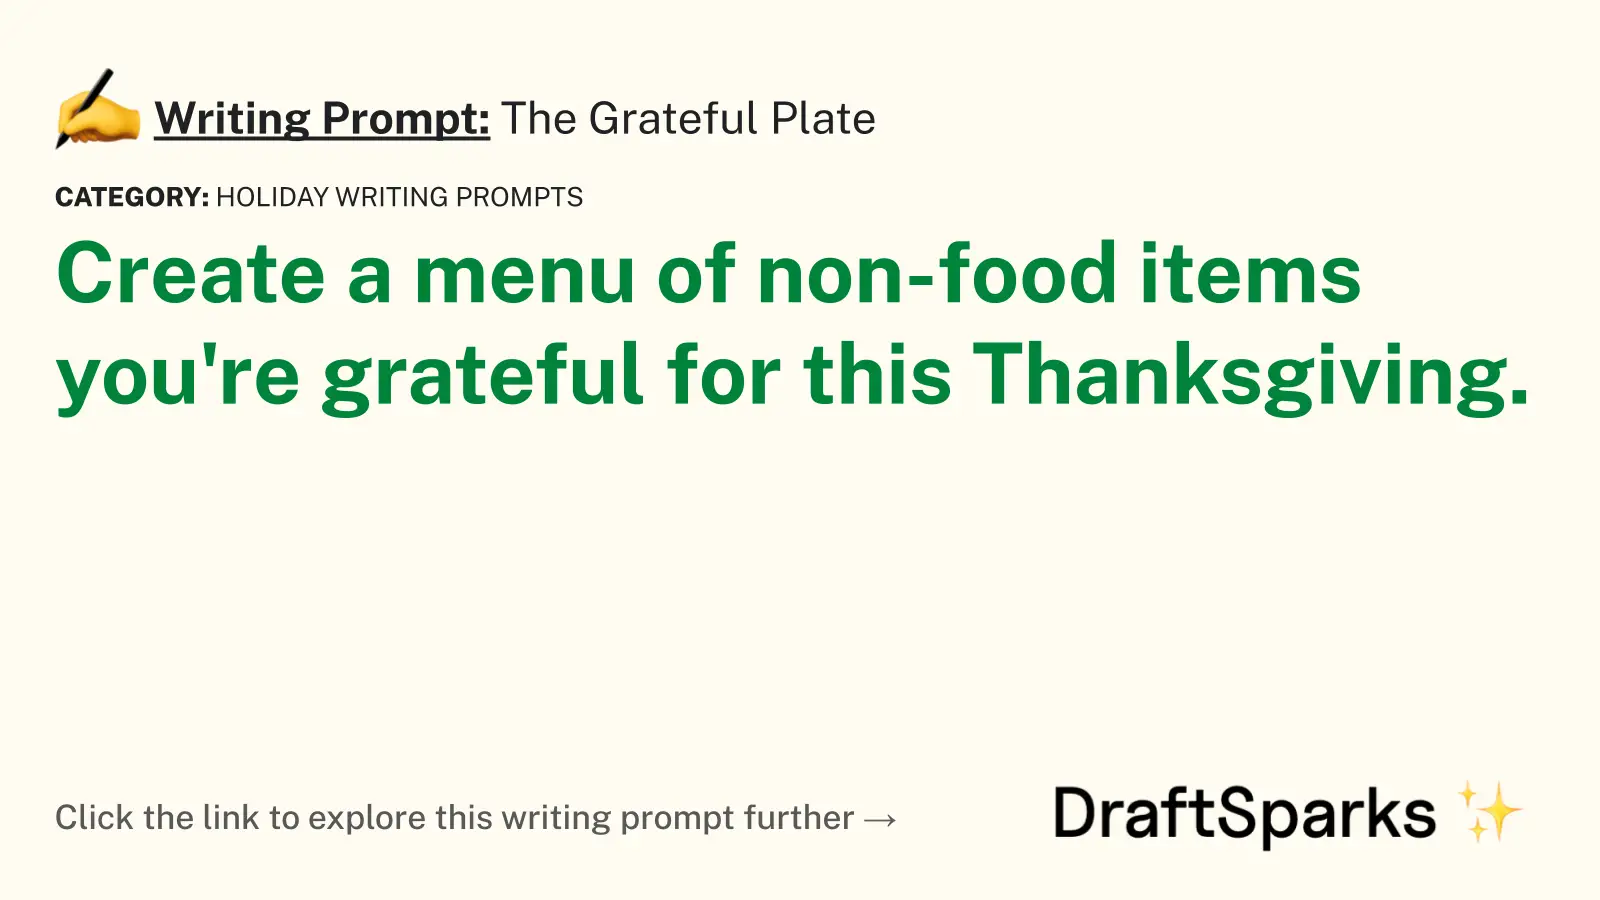 The Grateful Plate